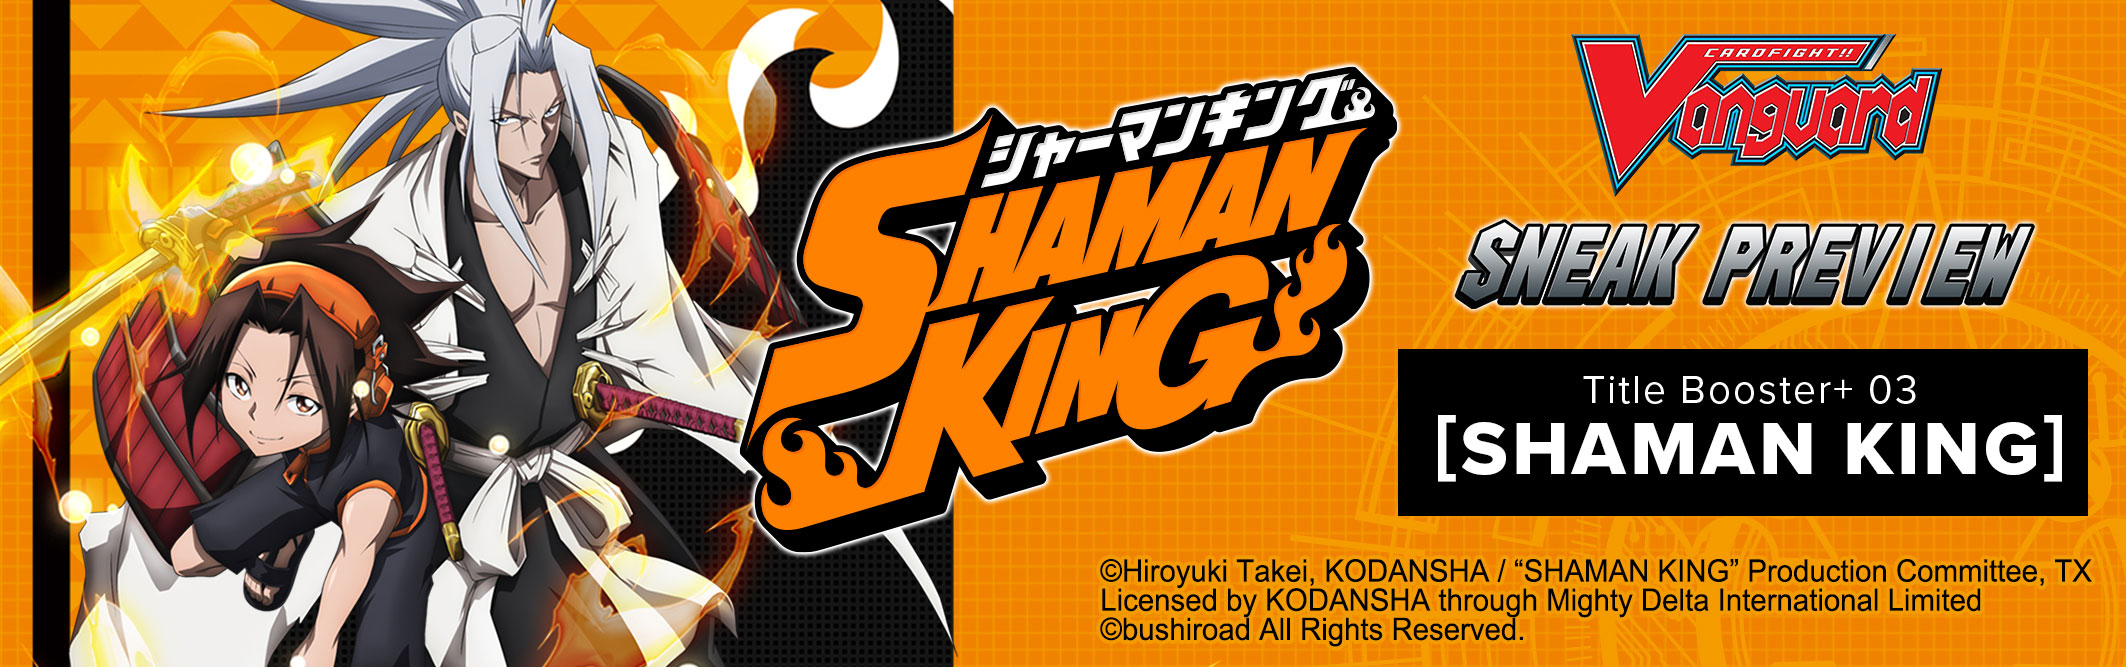 Cardfight!! Vanguard Title Booster+ 03 SHAMAN KING Sneak Preview